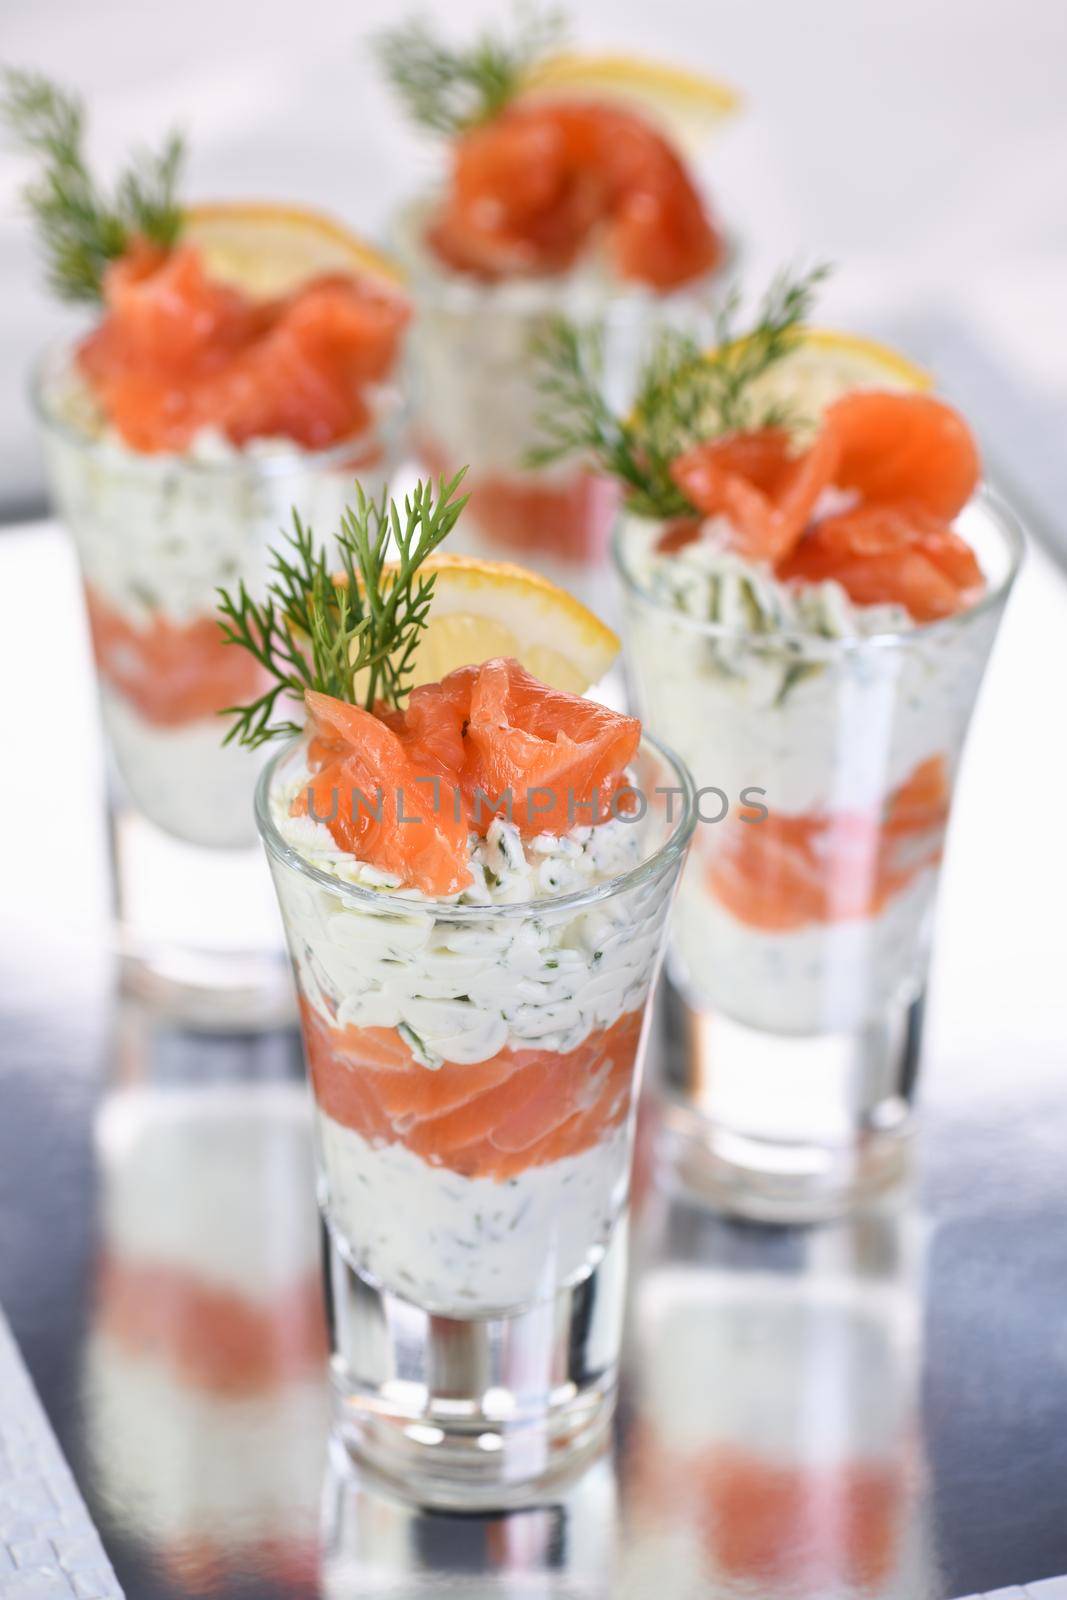 Verrine  from soft cheese cream and salmon, dill sprig and lemon slice. Aperitif appetizer.